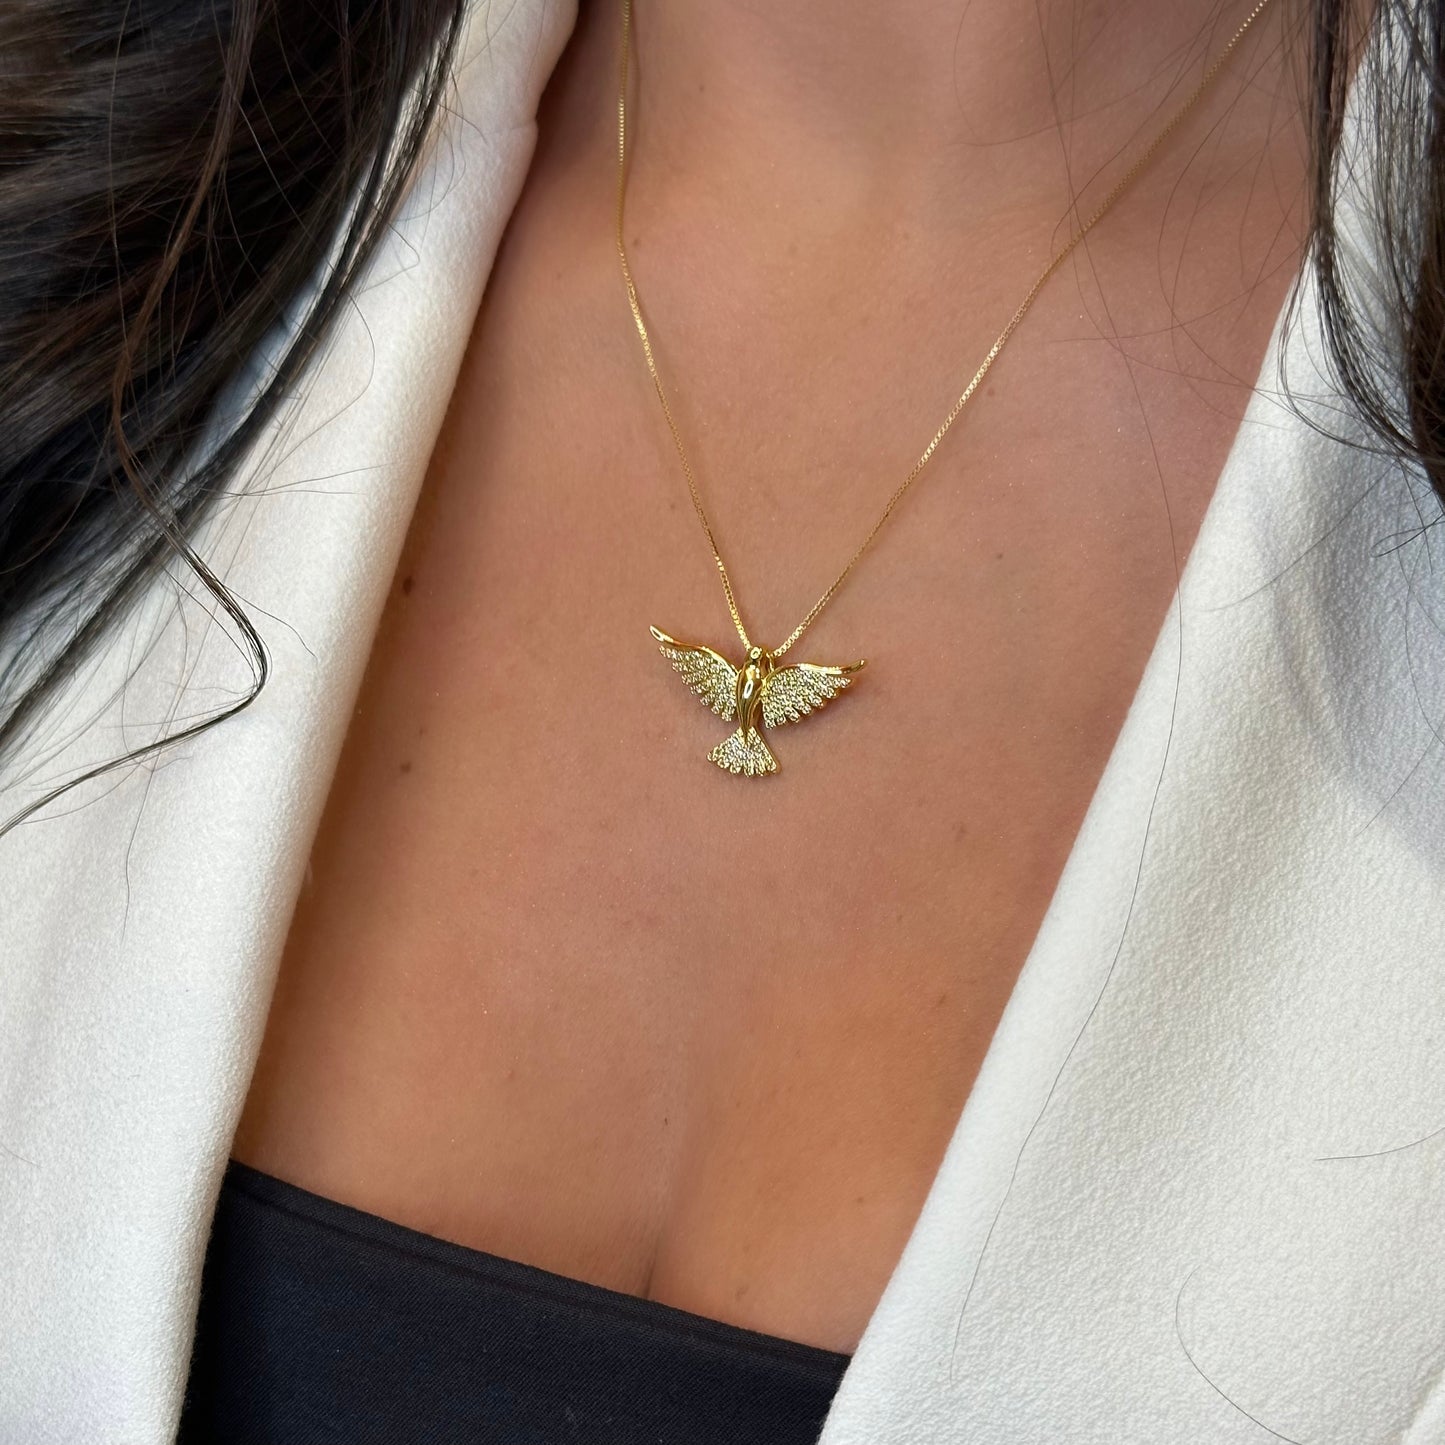 HOLY SPIRIT NECKLACE | Double 18K Gold Plated